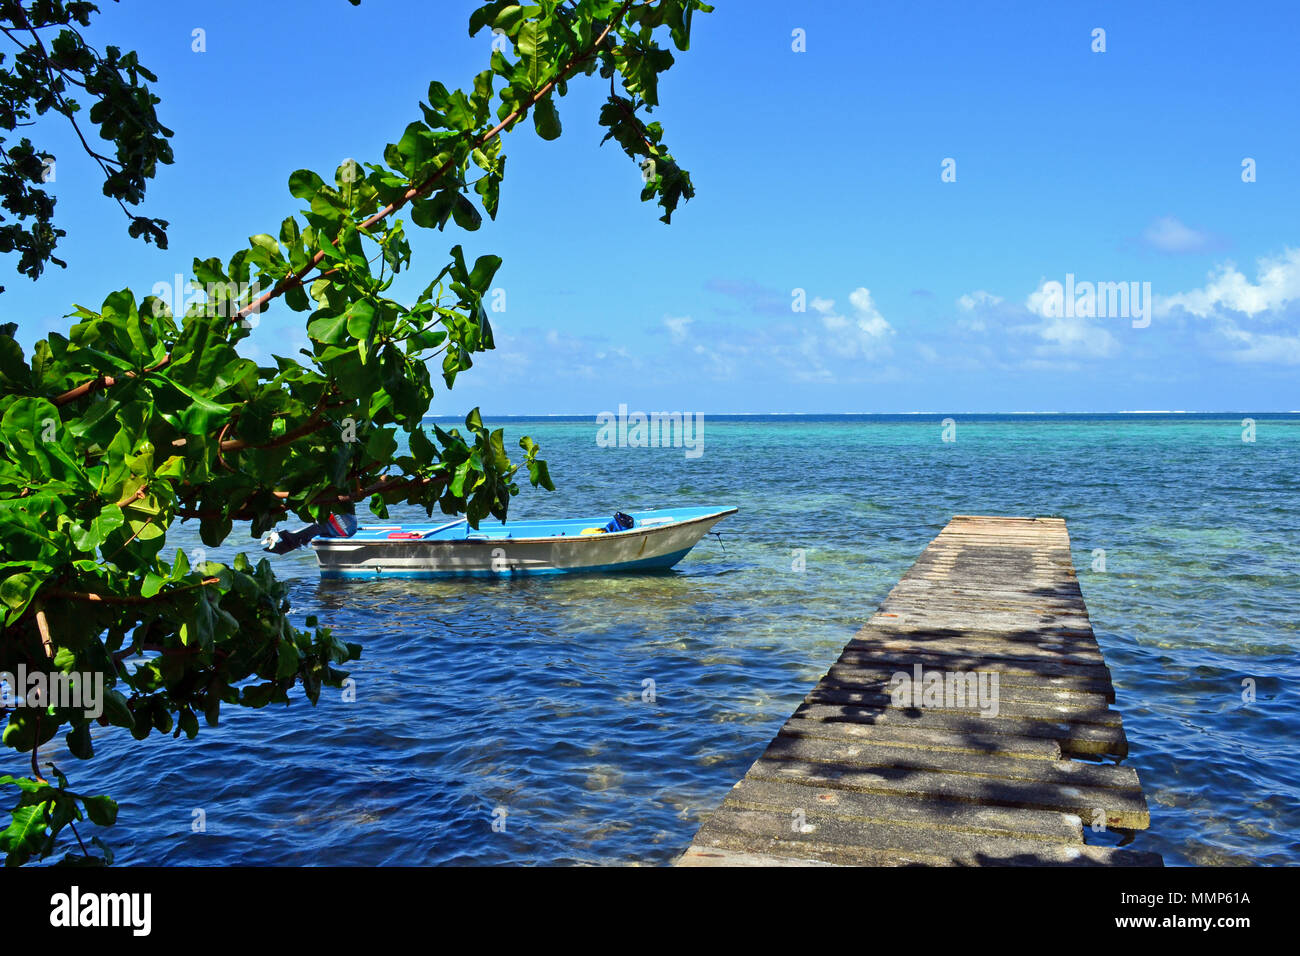 Boat close to a pier in a tropical island, Mwand Pass, Pohnpei, Federated States of Micronesia Stock Photo